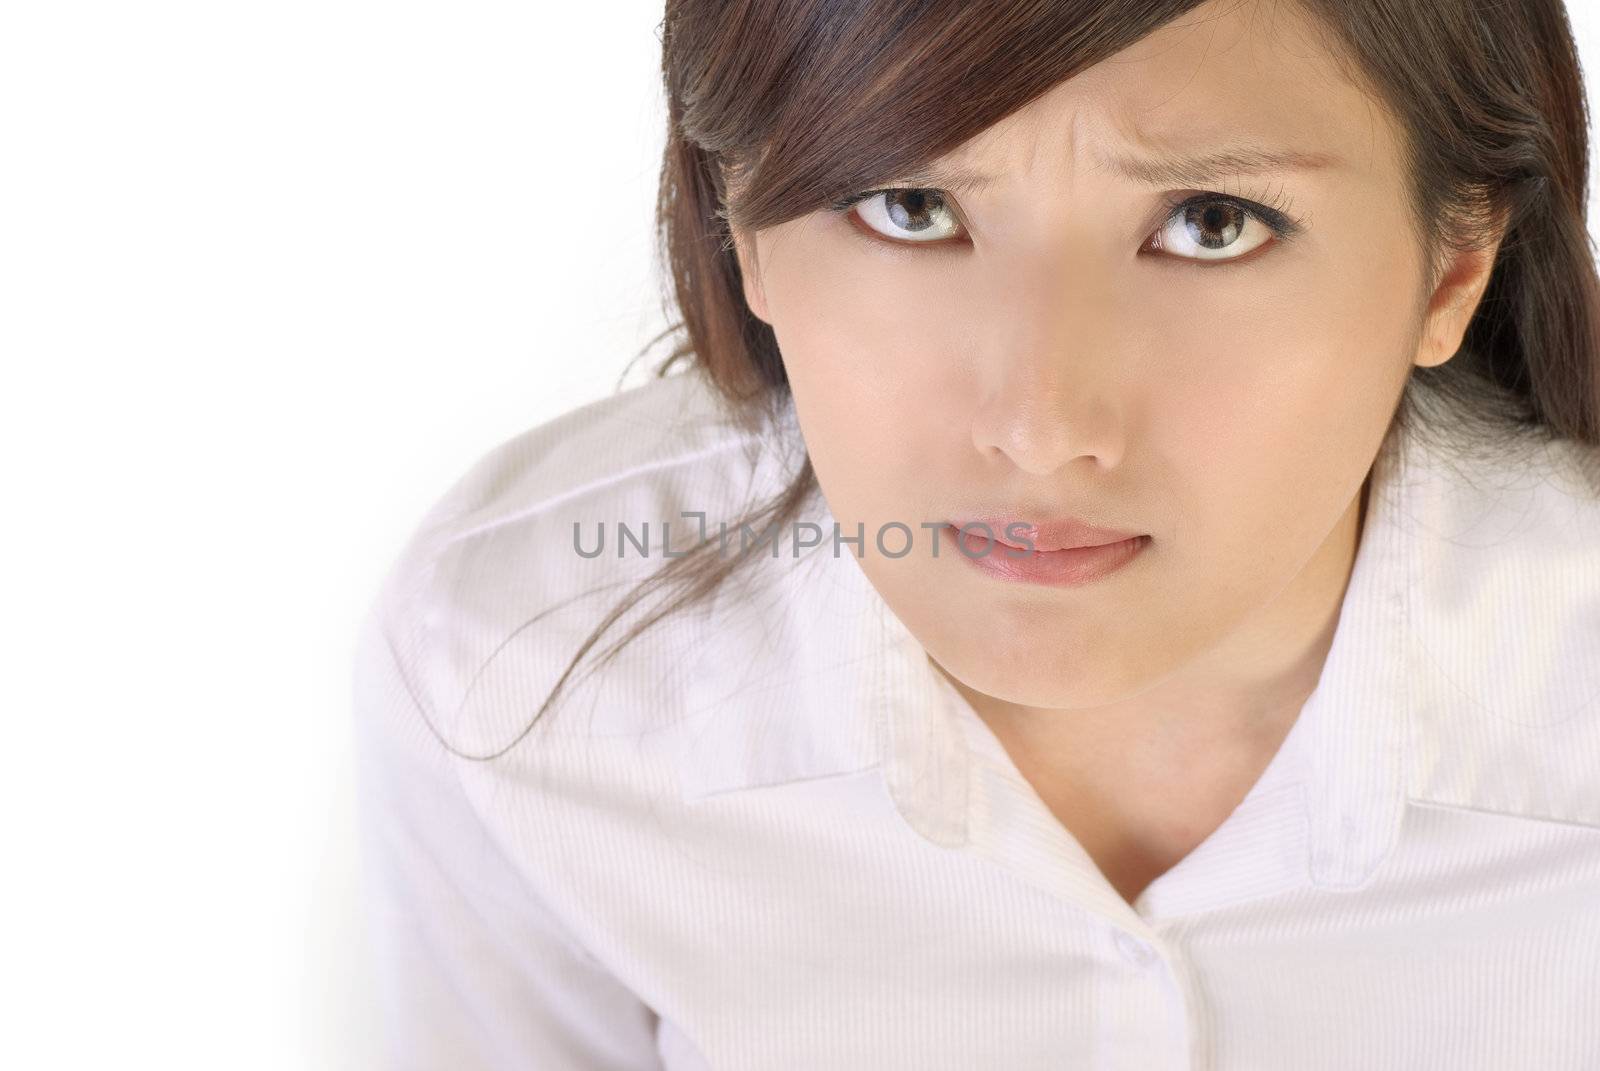 Angry expression of Asian businesswoman on white background.